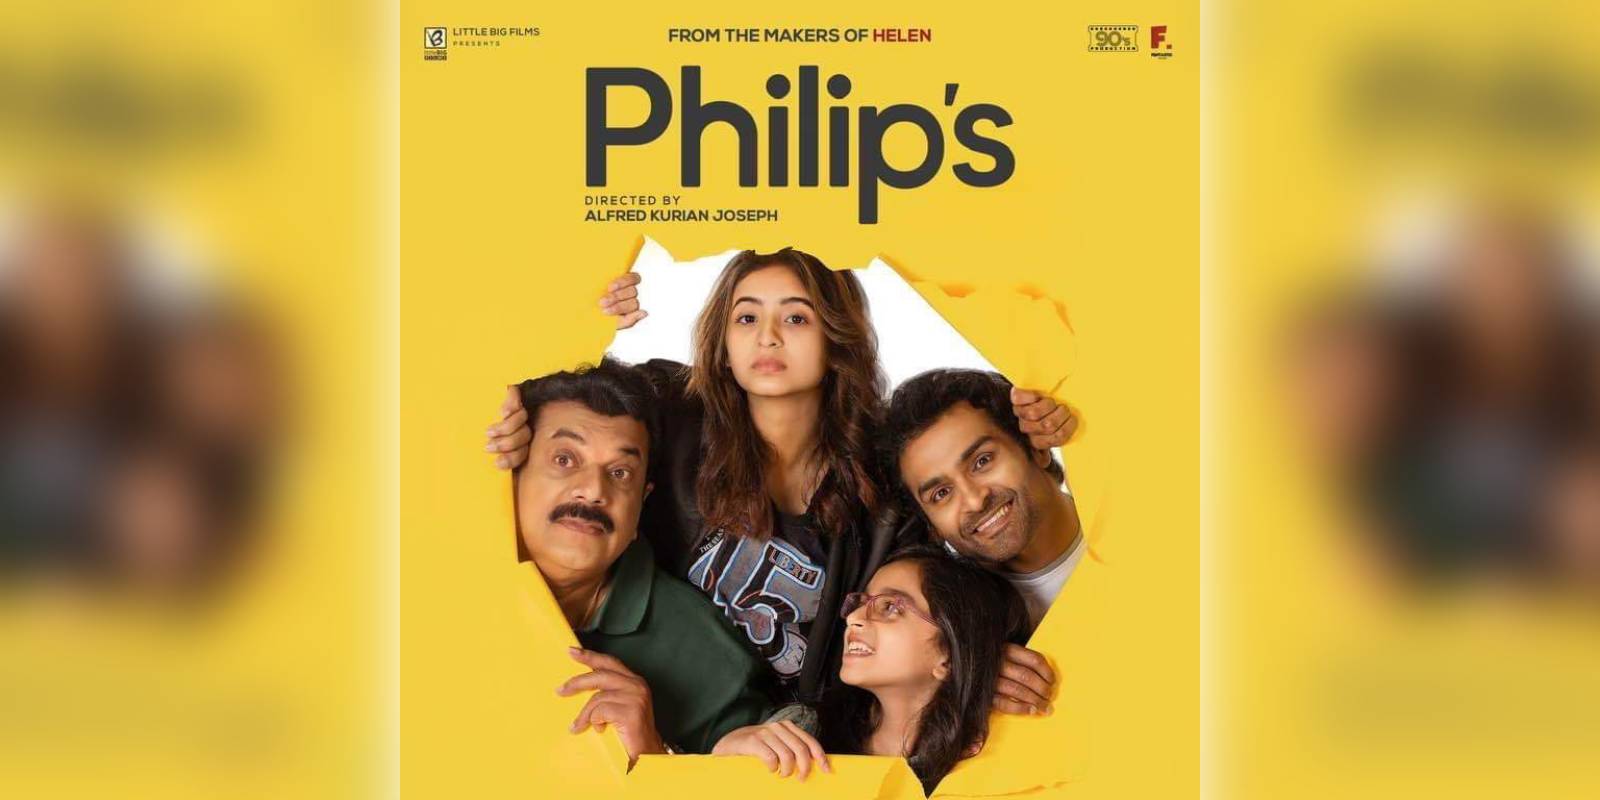 A poster of the film Philip's